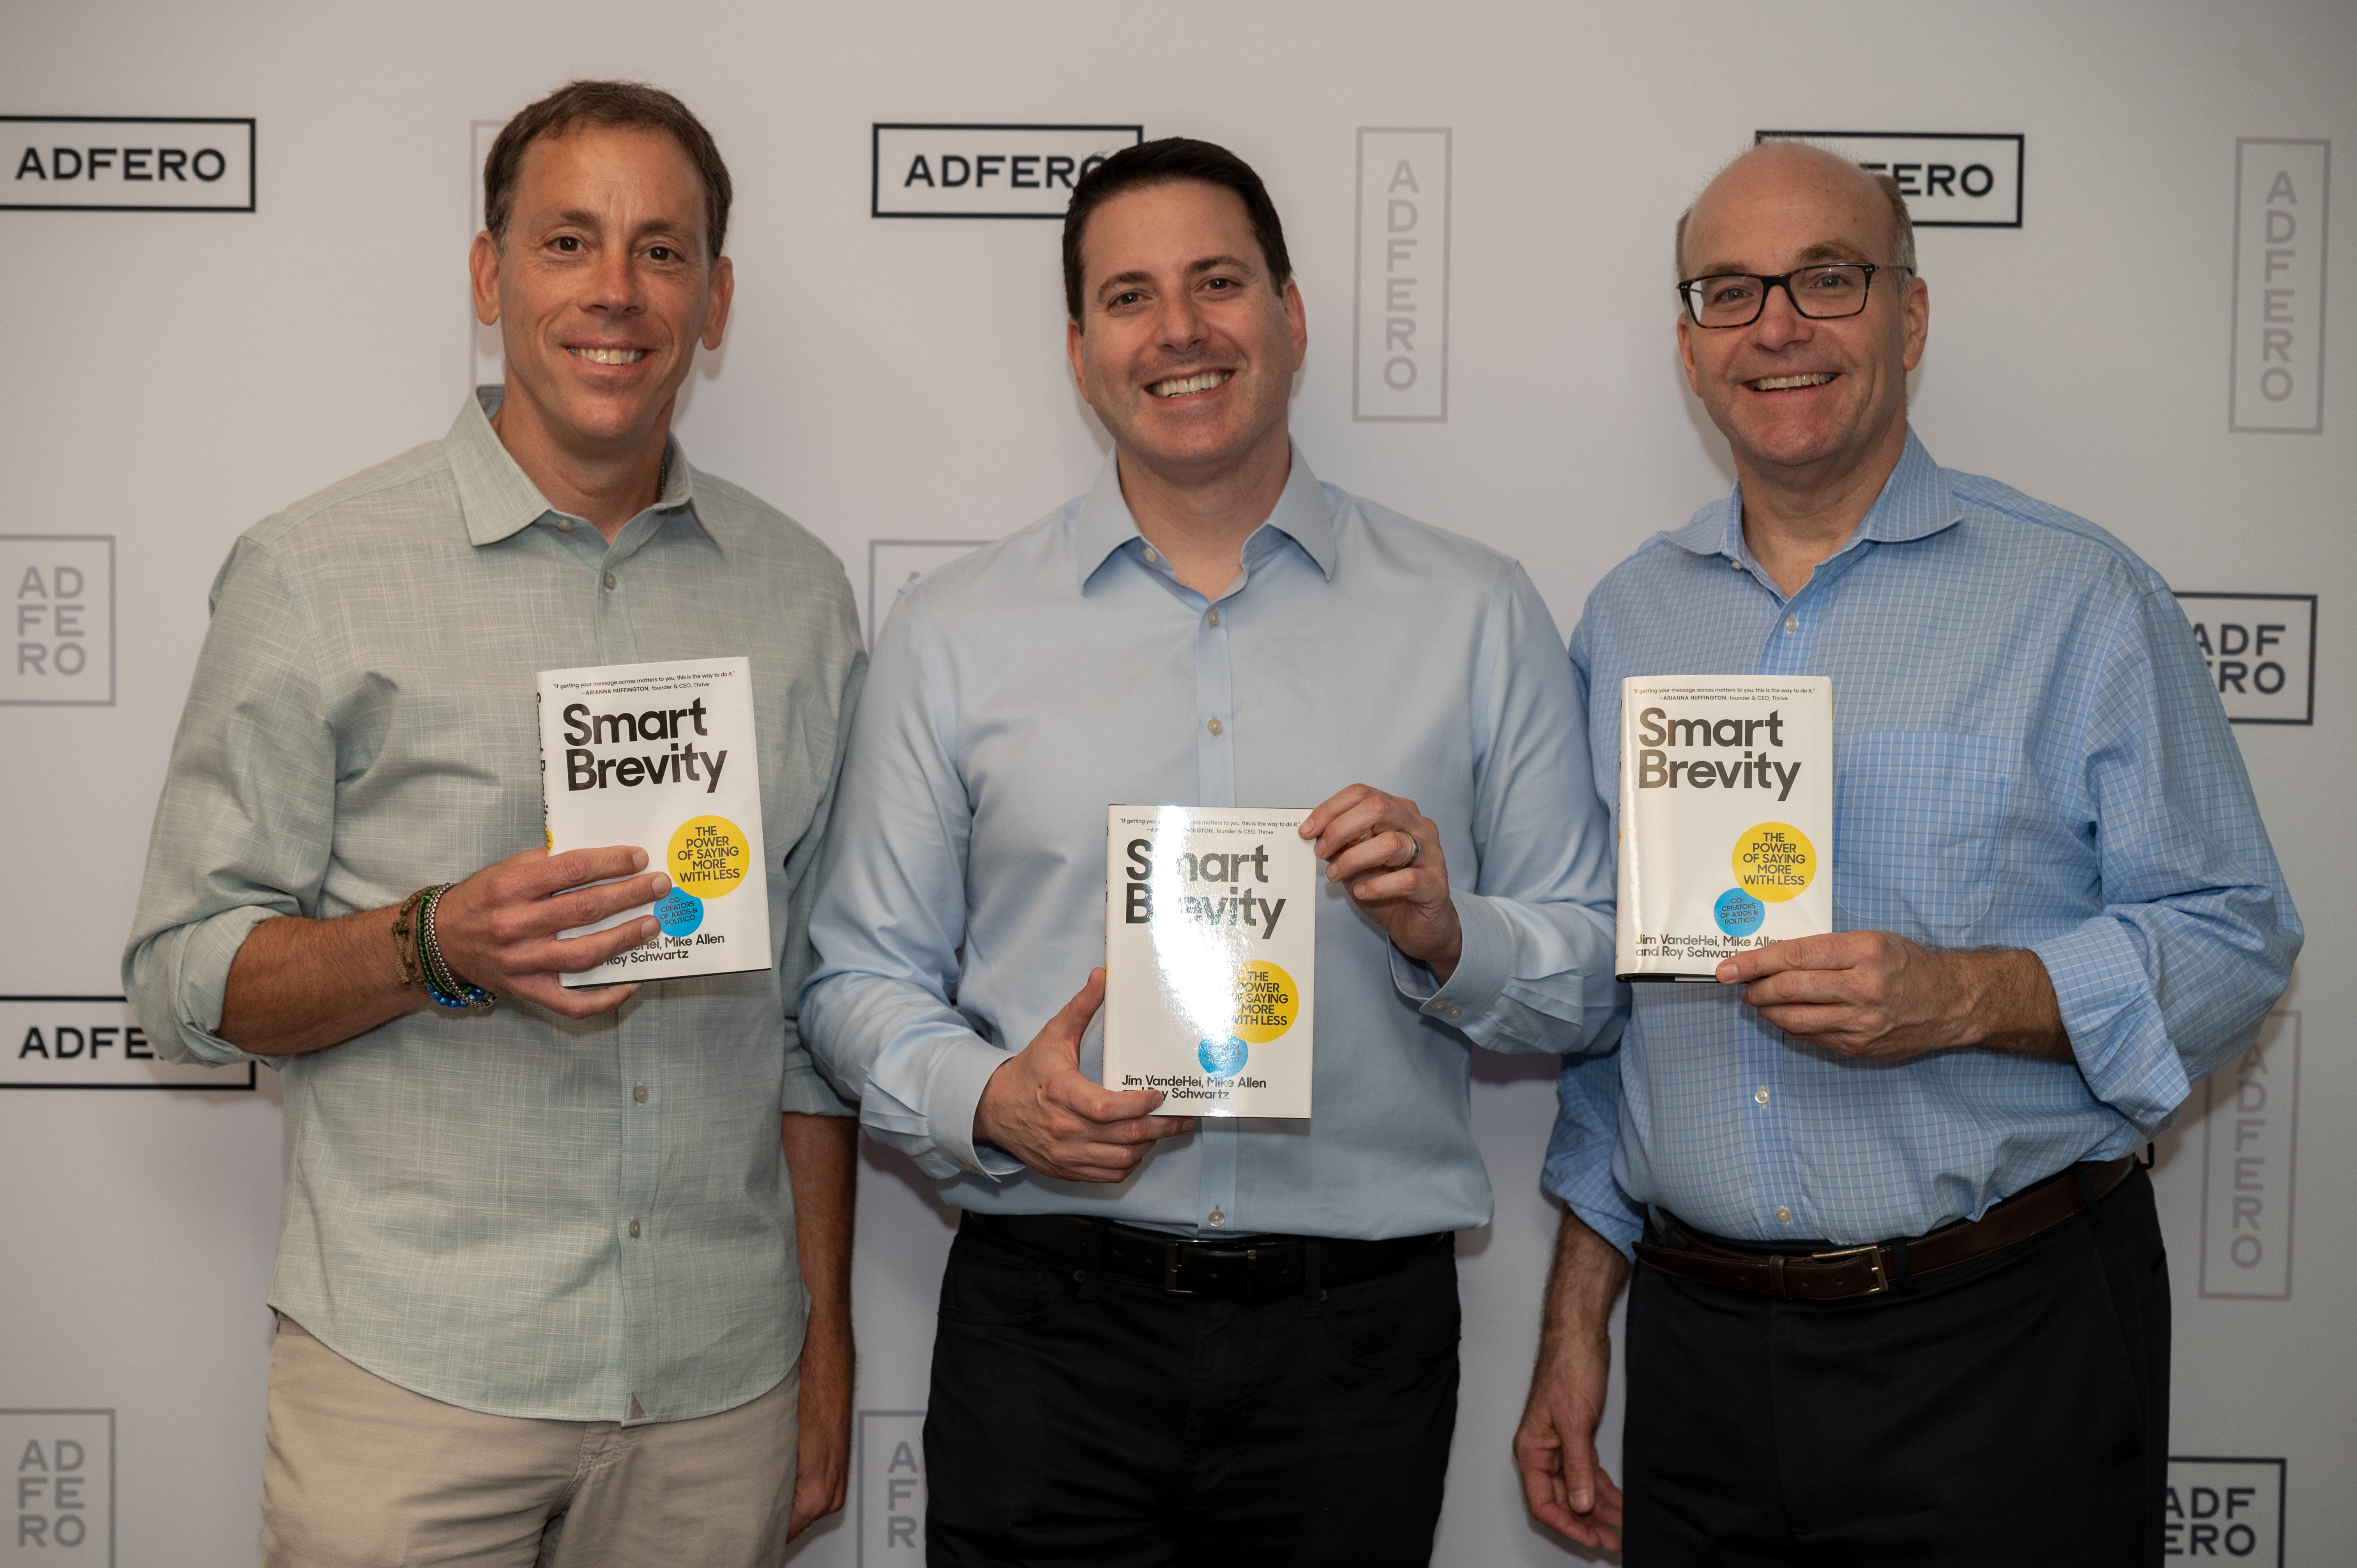 Adero Smart Brevity Event - Jim VandeHei, Roy Schwartz and Mike Allen, co-founders of Axios stand with their book Smart Brevity, The Power of Saying More With Less